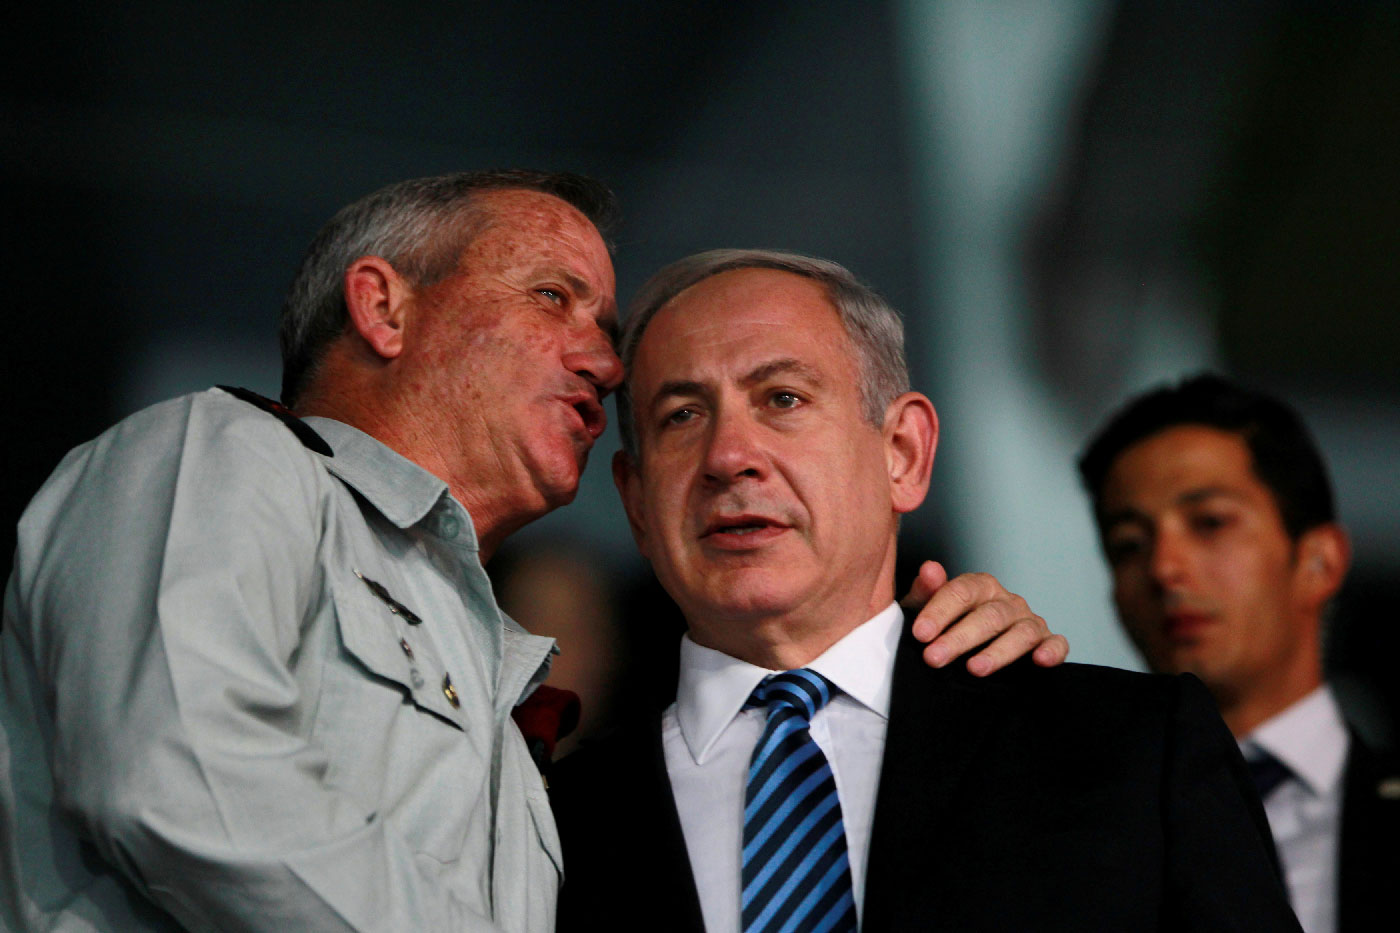 Israel's Prime Minister Benjamin Netanyahu (R) and Israel's armed forces chief Major-General Benny Gantz speak during the opening ceremony of the 19th Maccabiah Games at Teddy Stadium in occupied Jerusalem July 18, 2013.